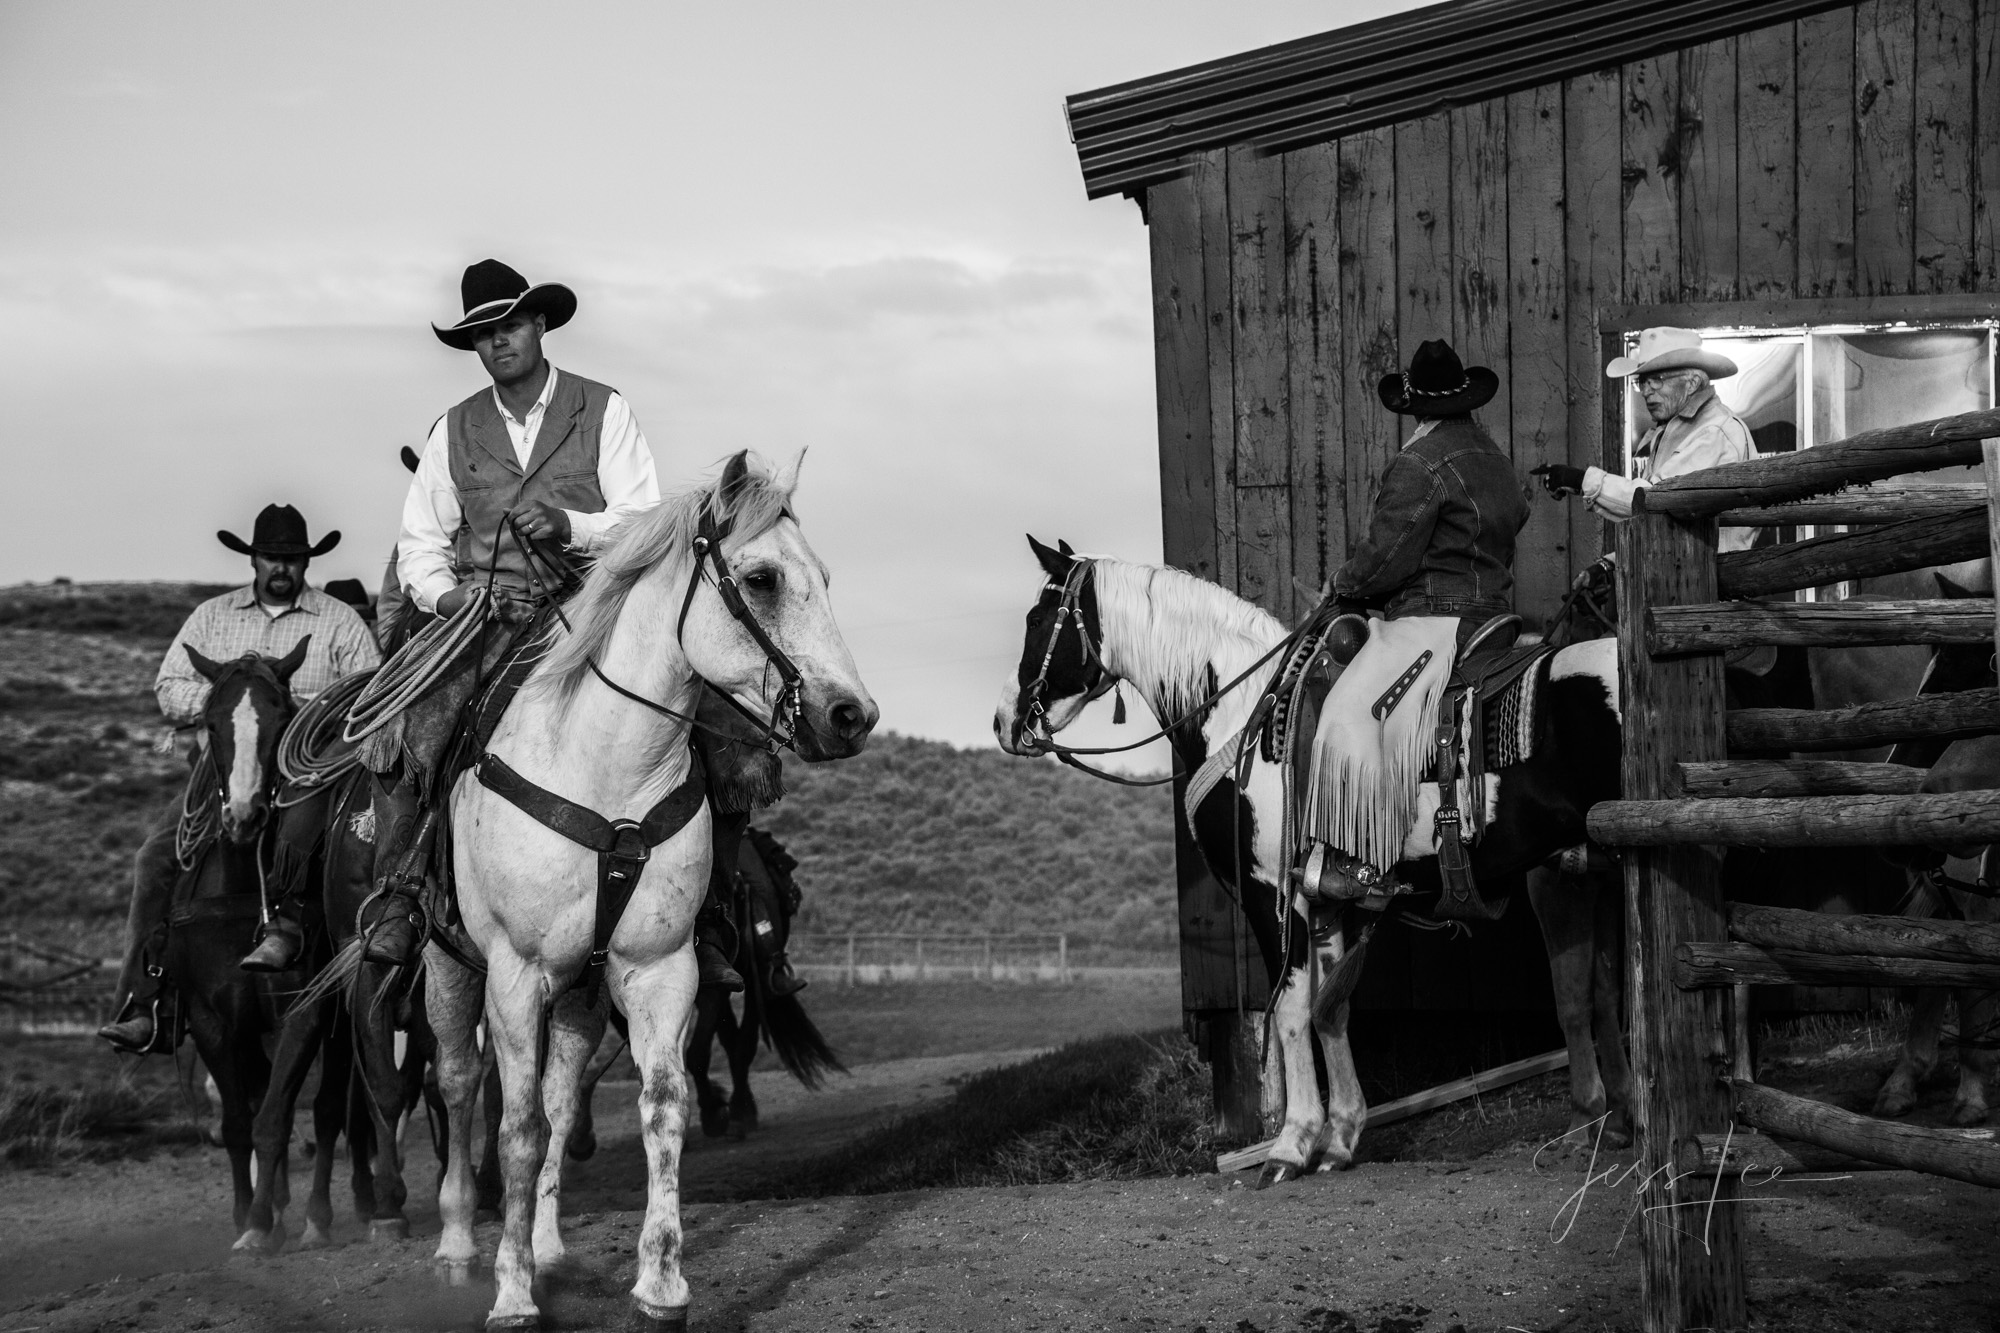 Fine Art Limited Edition Photo Prints of Cowboys, Horses, and life in the West. Time to Go. A Cowboy picture in black and white...